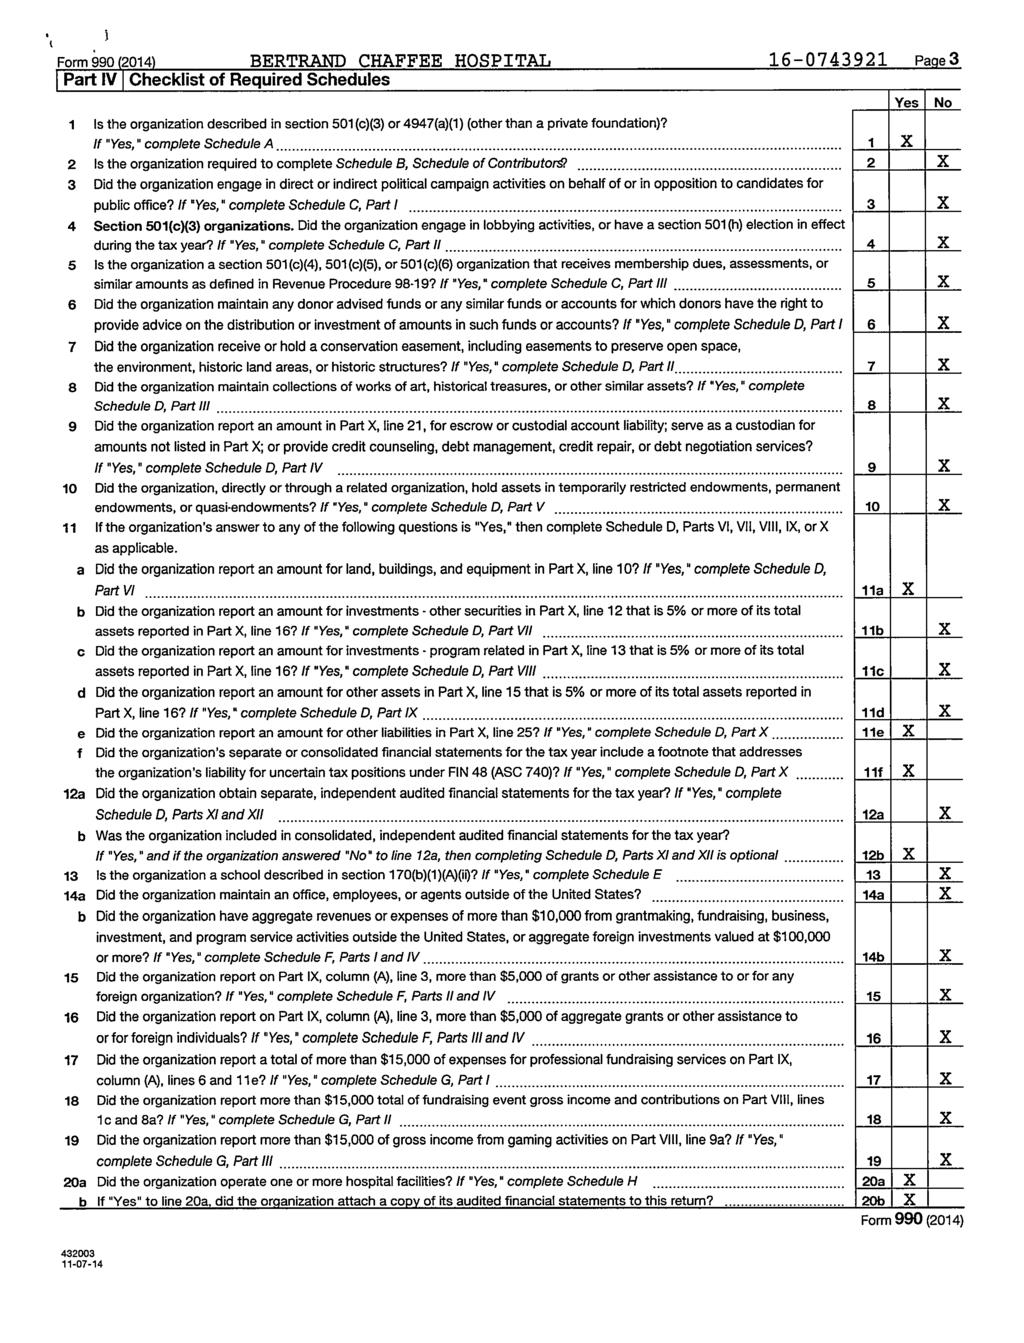 Form 990 (2014) EJRTRANJJ CHA' fios.&ital Part IV I Checklist of Required Schedules.Lb- Yes I No I Is the organization described in section 501 (c)(3) or 4947(a)(1) (other than a private foundation)?